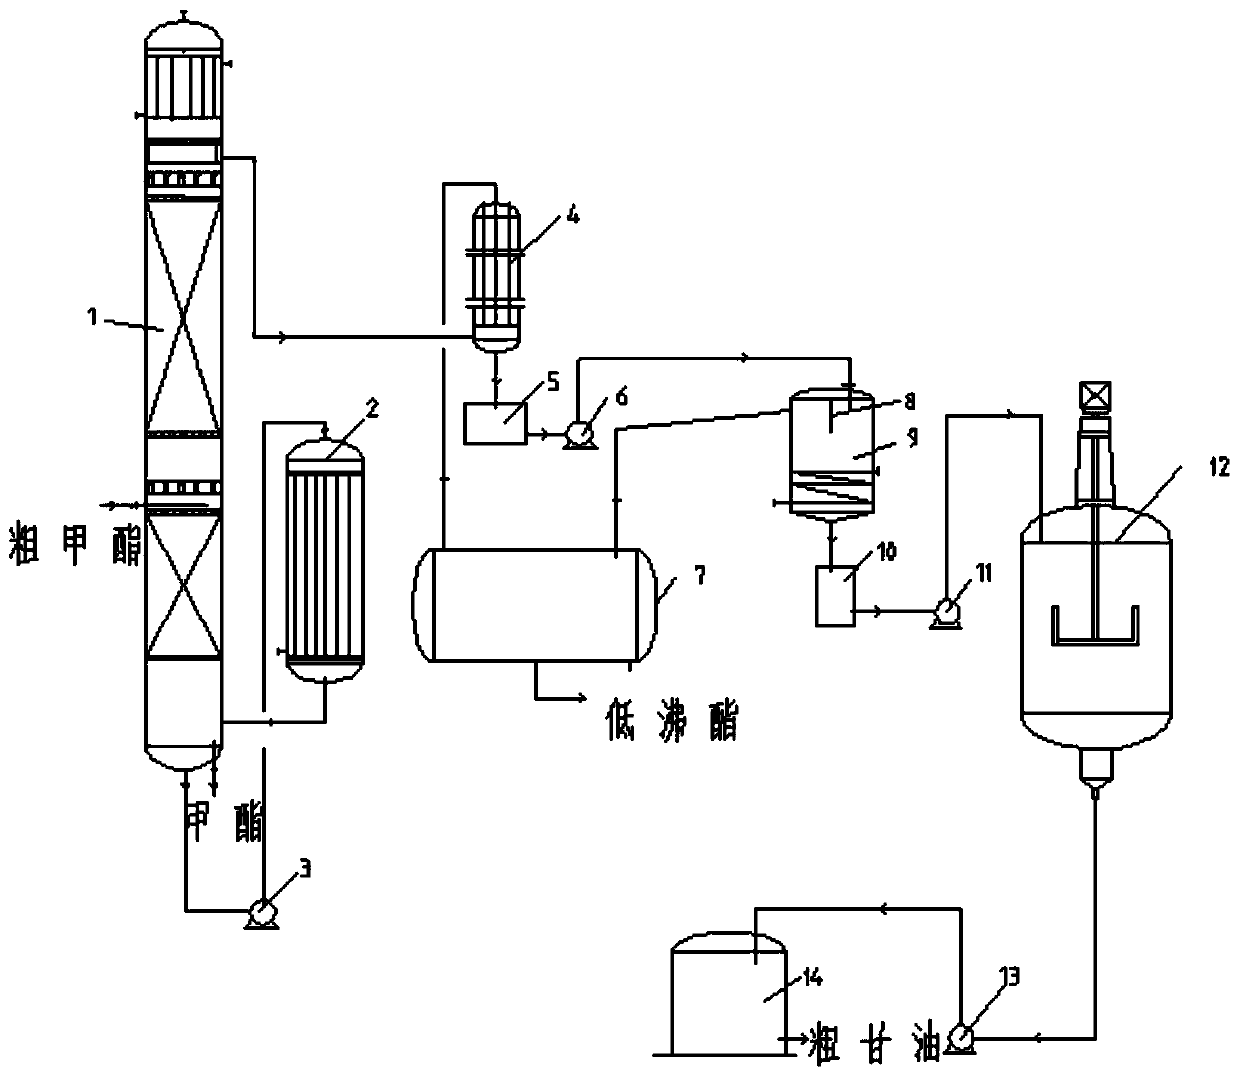 Low-boiling-point ester and glycerol separation device for biodiesel distillation process